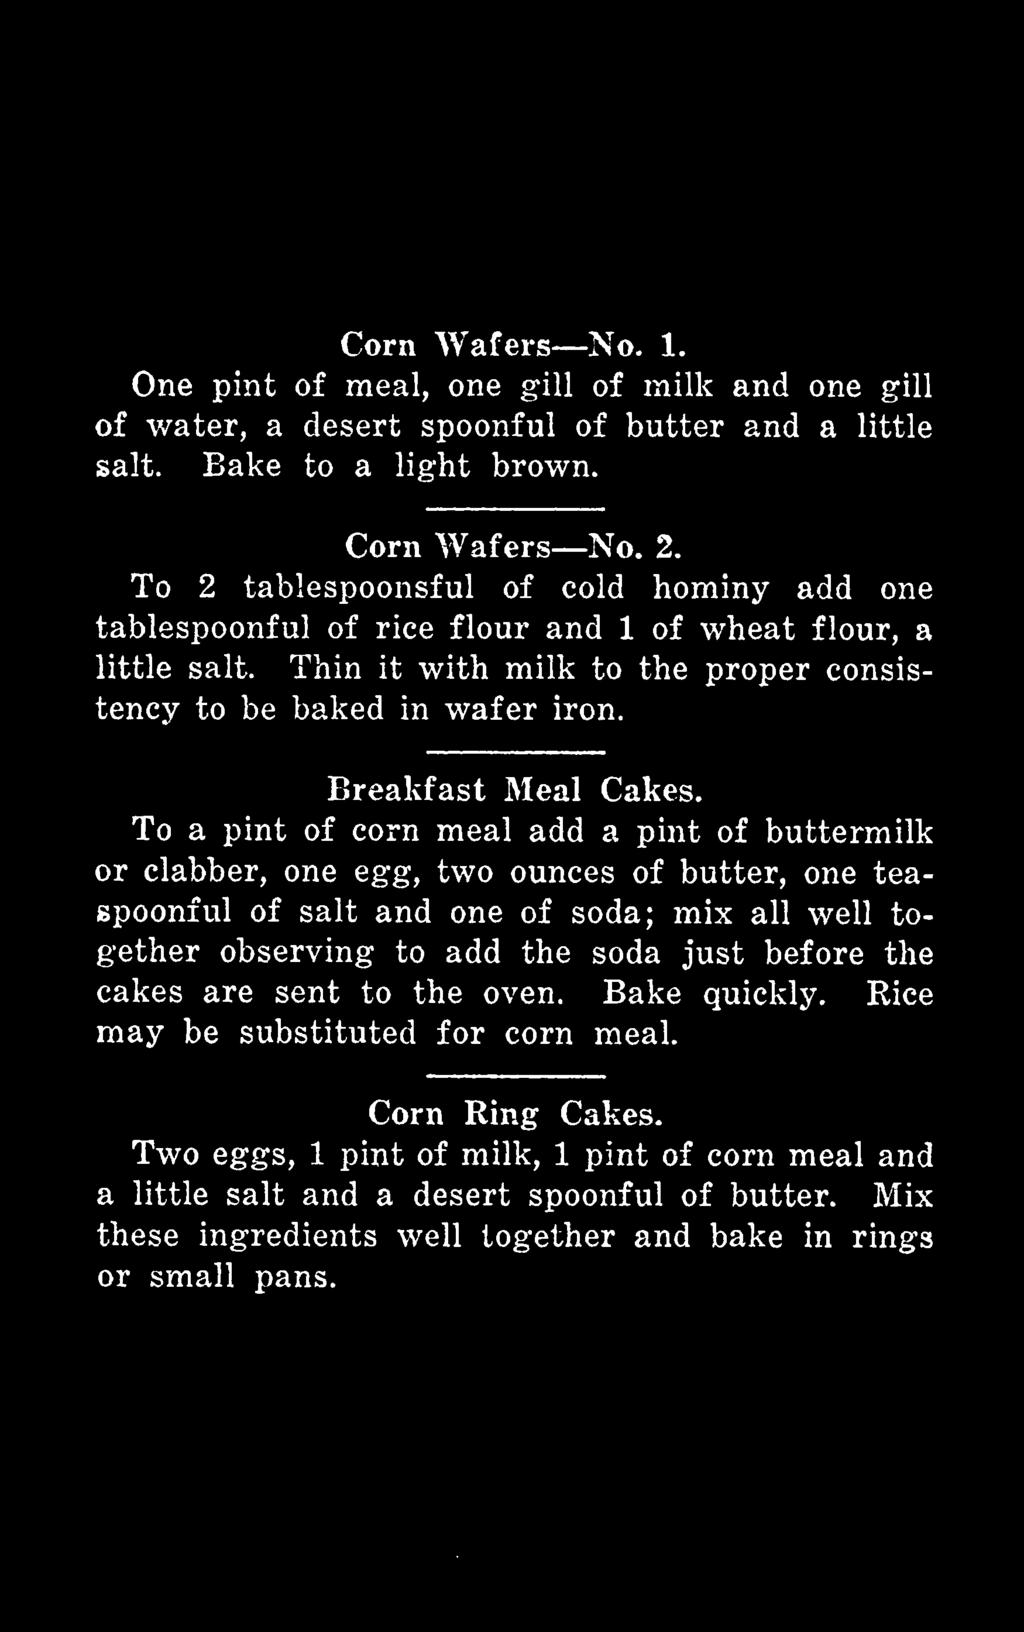 To a pint of corn meal add a pint of buttermilk or clabber, one egg, two ounces of butter, one teaspoonful of salt and one of soda; mix all well together observing to add the soda just before the